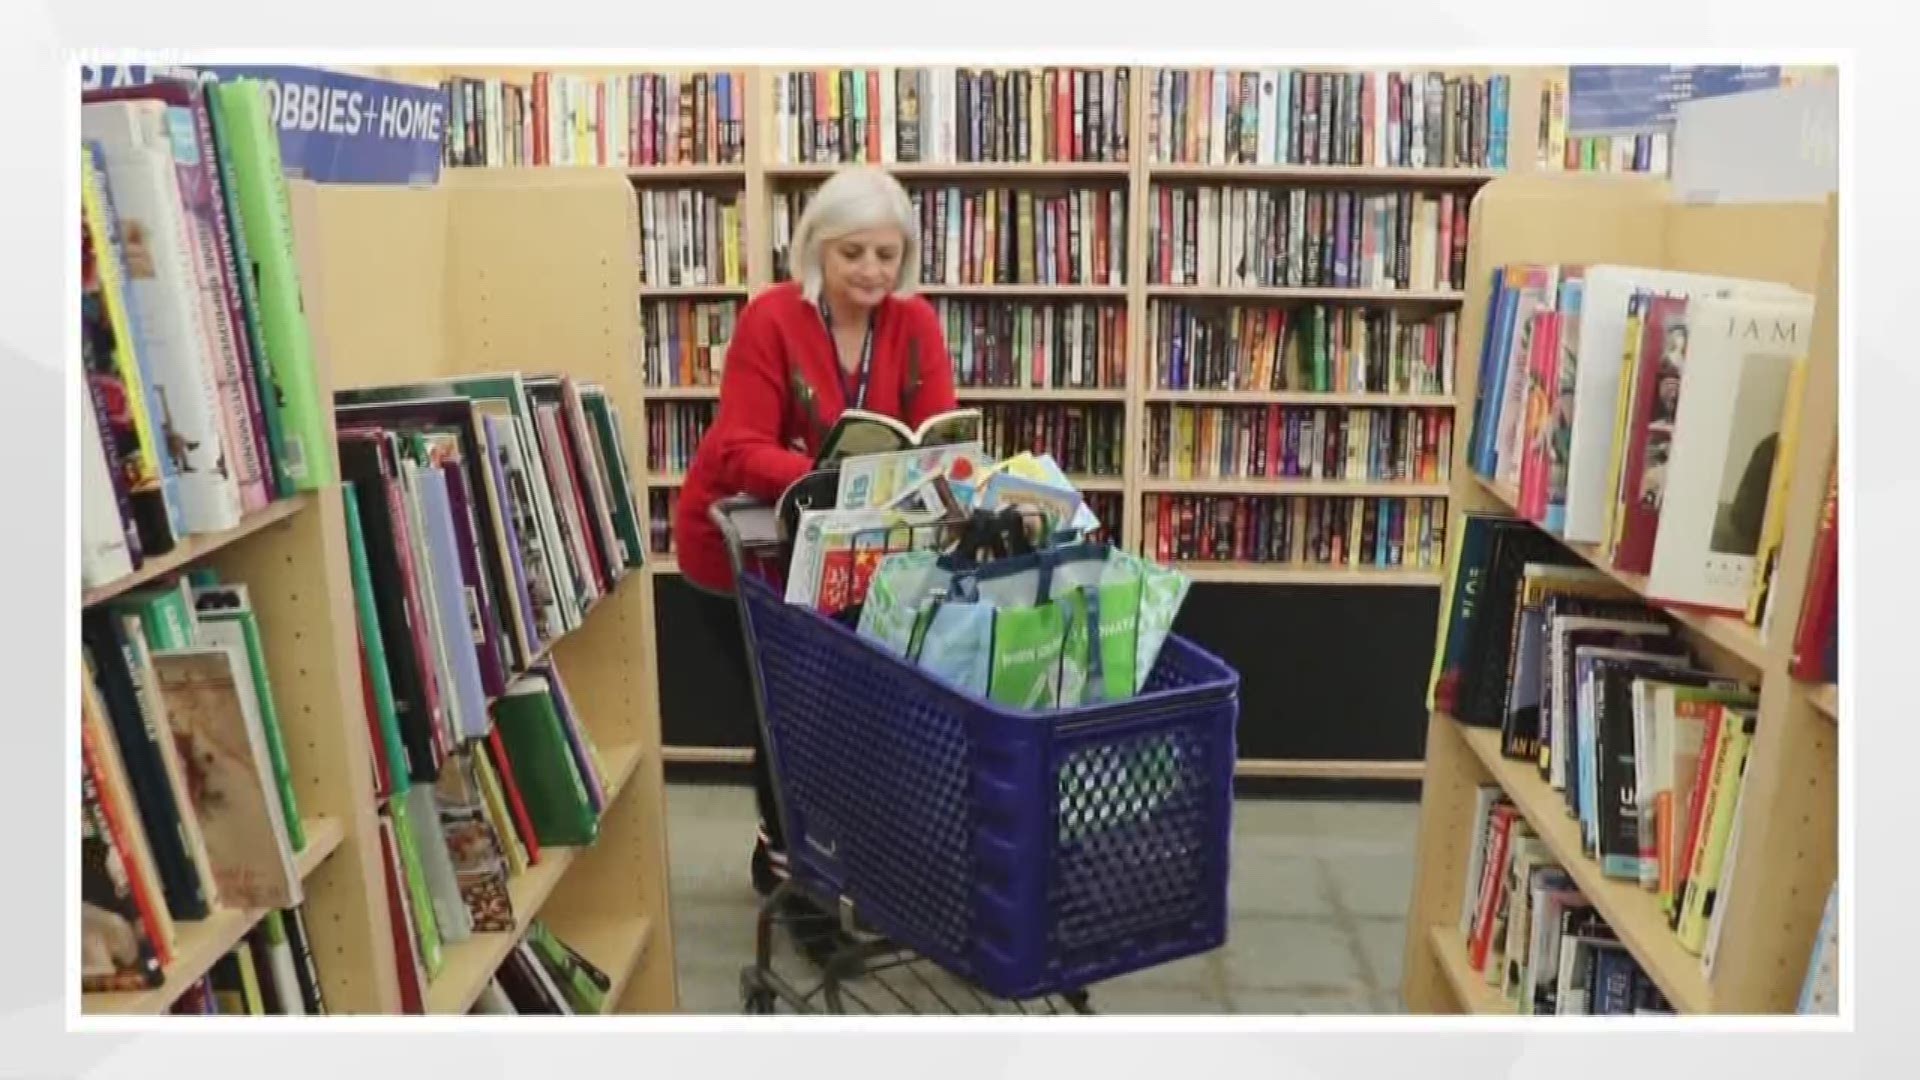 A local librarian is honored for turning a storage room into a school library by hand selecting and purchasing thousands of books from Goodwill